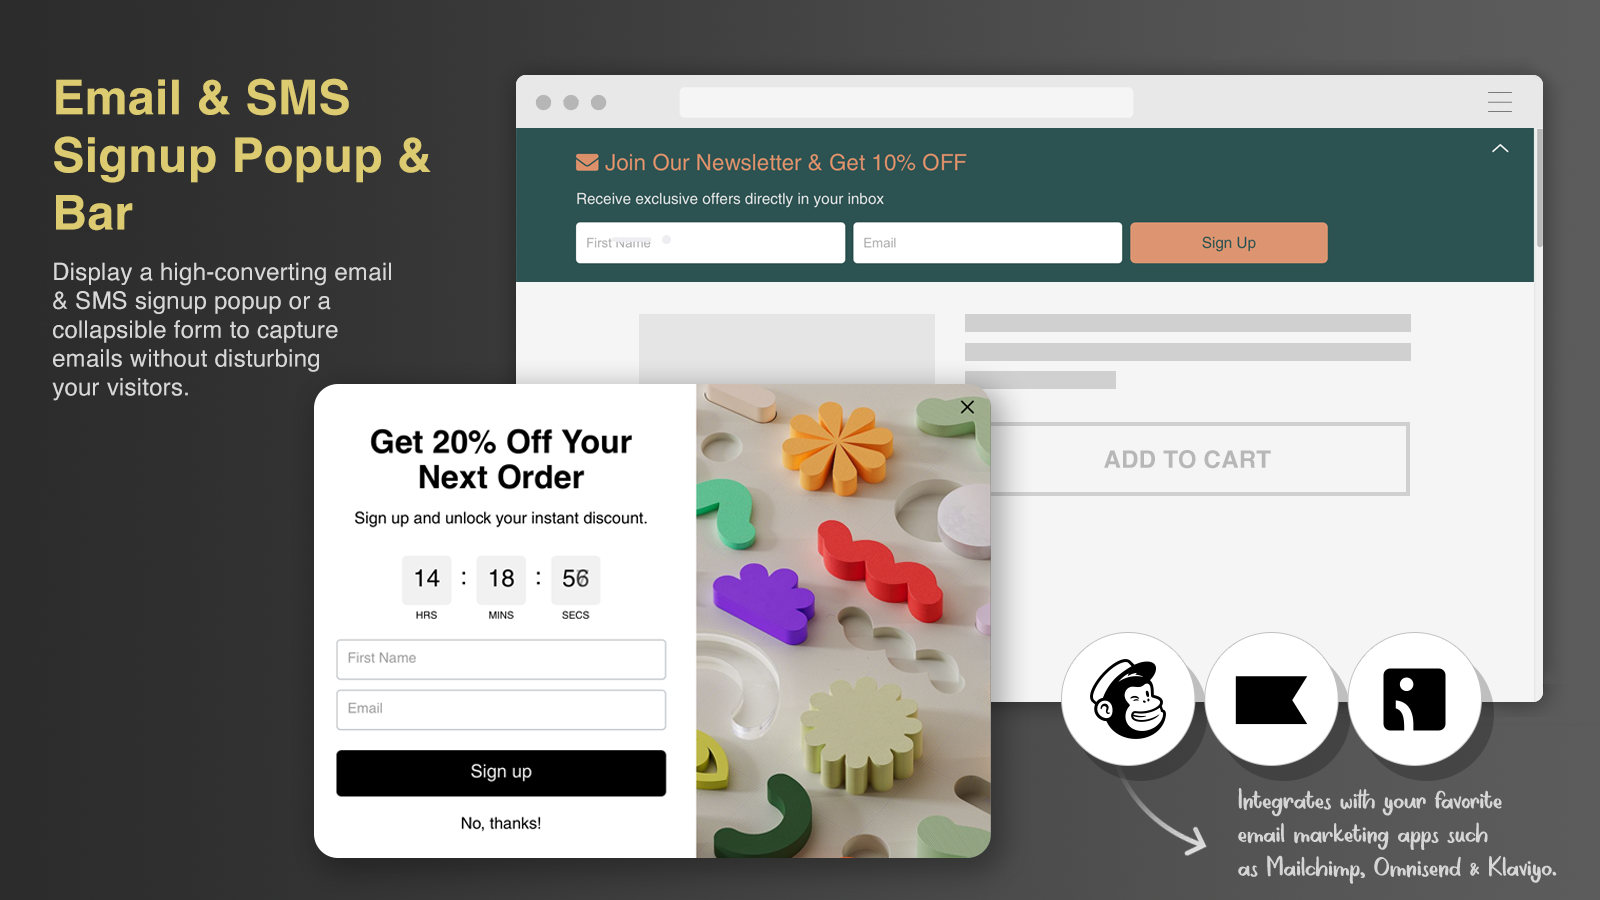 Email & SMS signup popups and collapsible forms